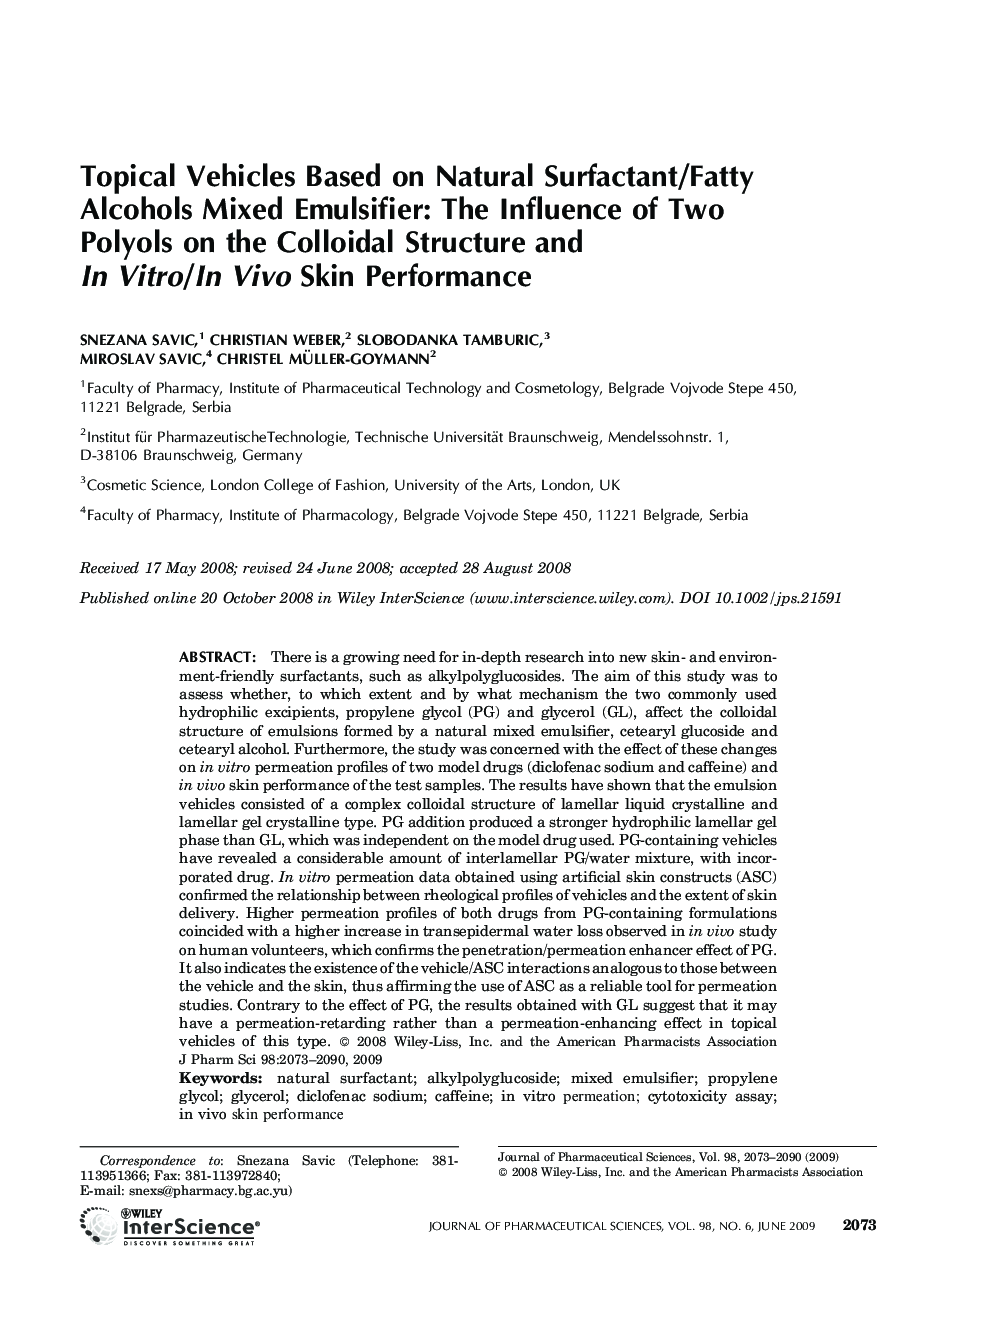 Topical vehicles based on natural surfactant/fatty alcohols mixed emulsifier: The influence of two polyols on the colloidal structure and in vitro/in vivo skin performance